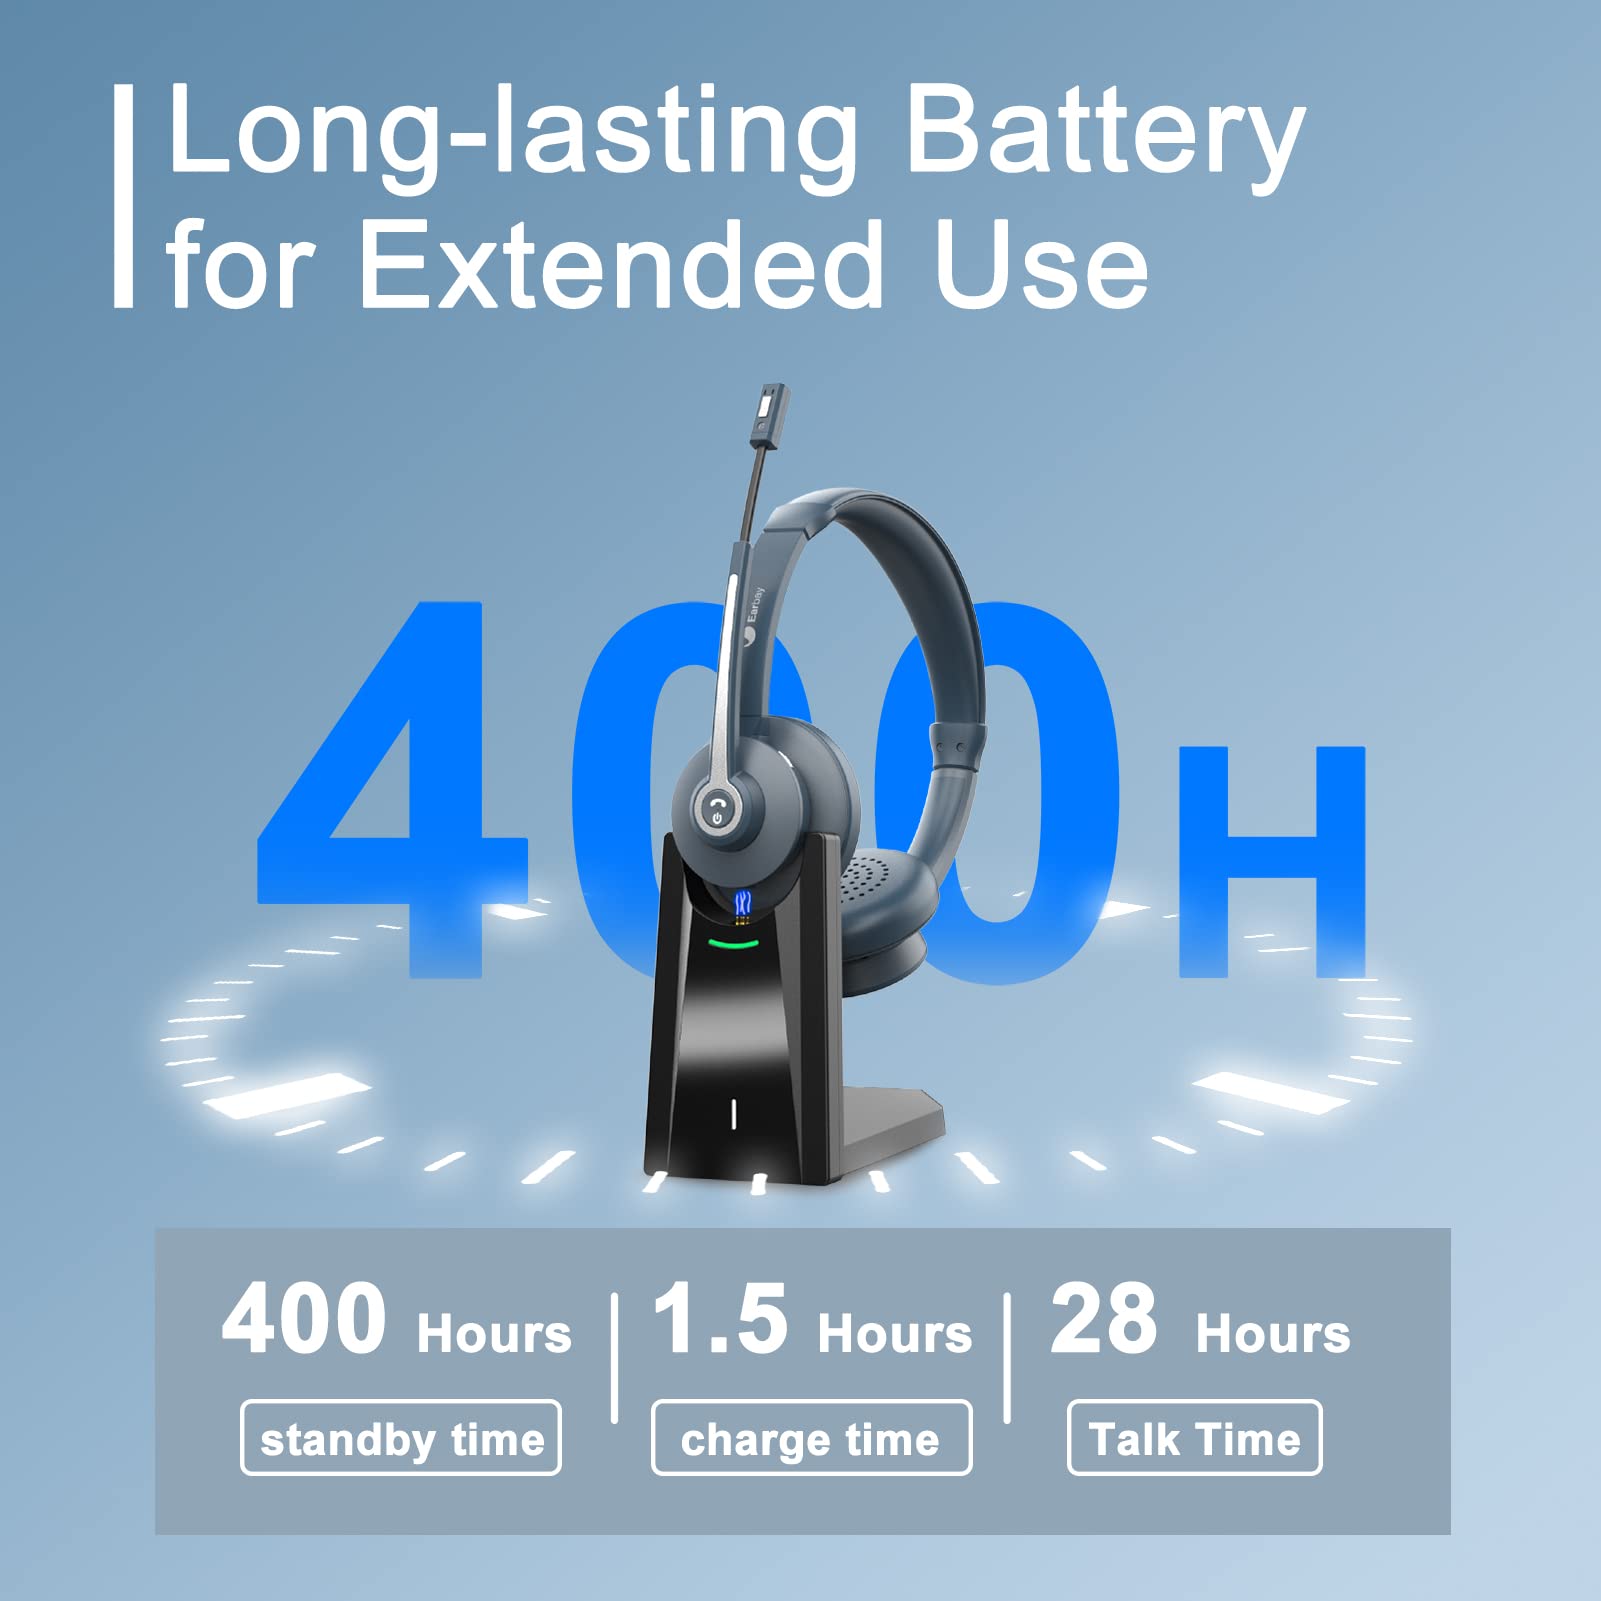 Long-lasting battery for extended use,400 Hours standby time,1.5 Hours charge time,28 Hours talk time .